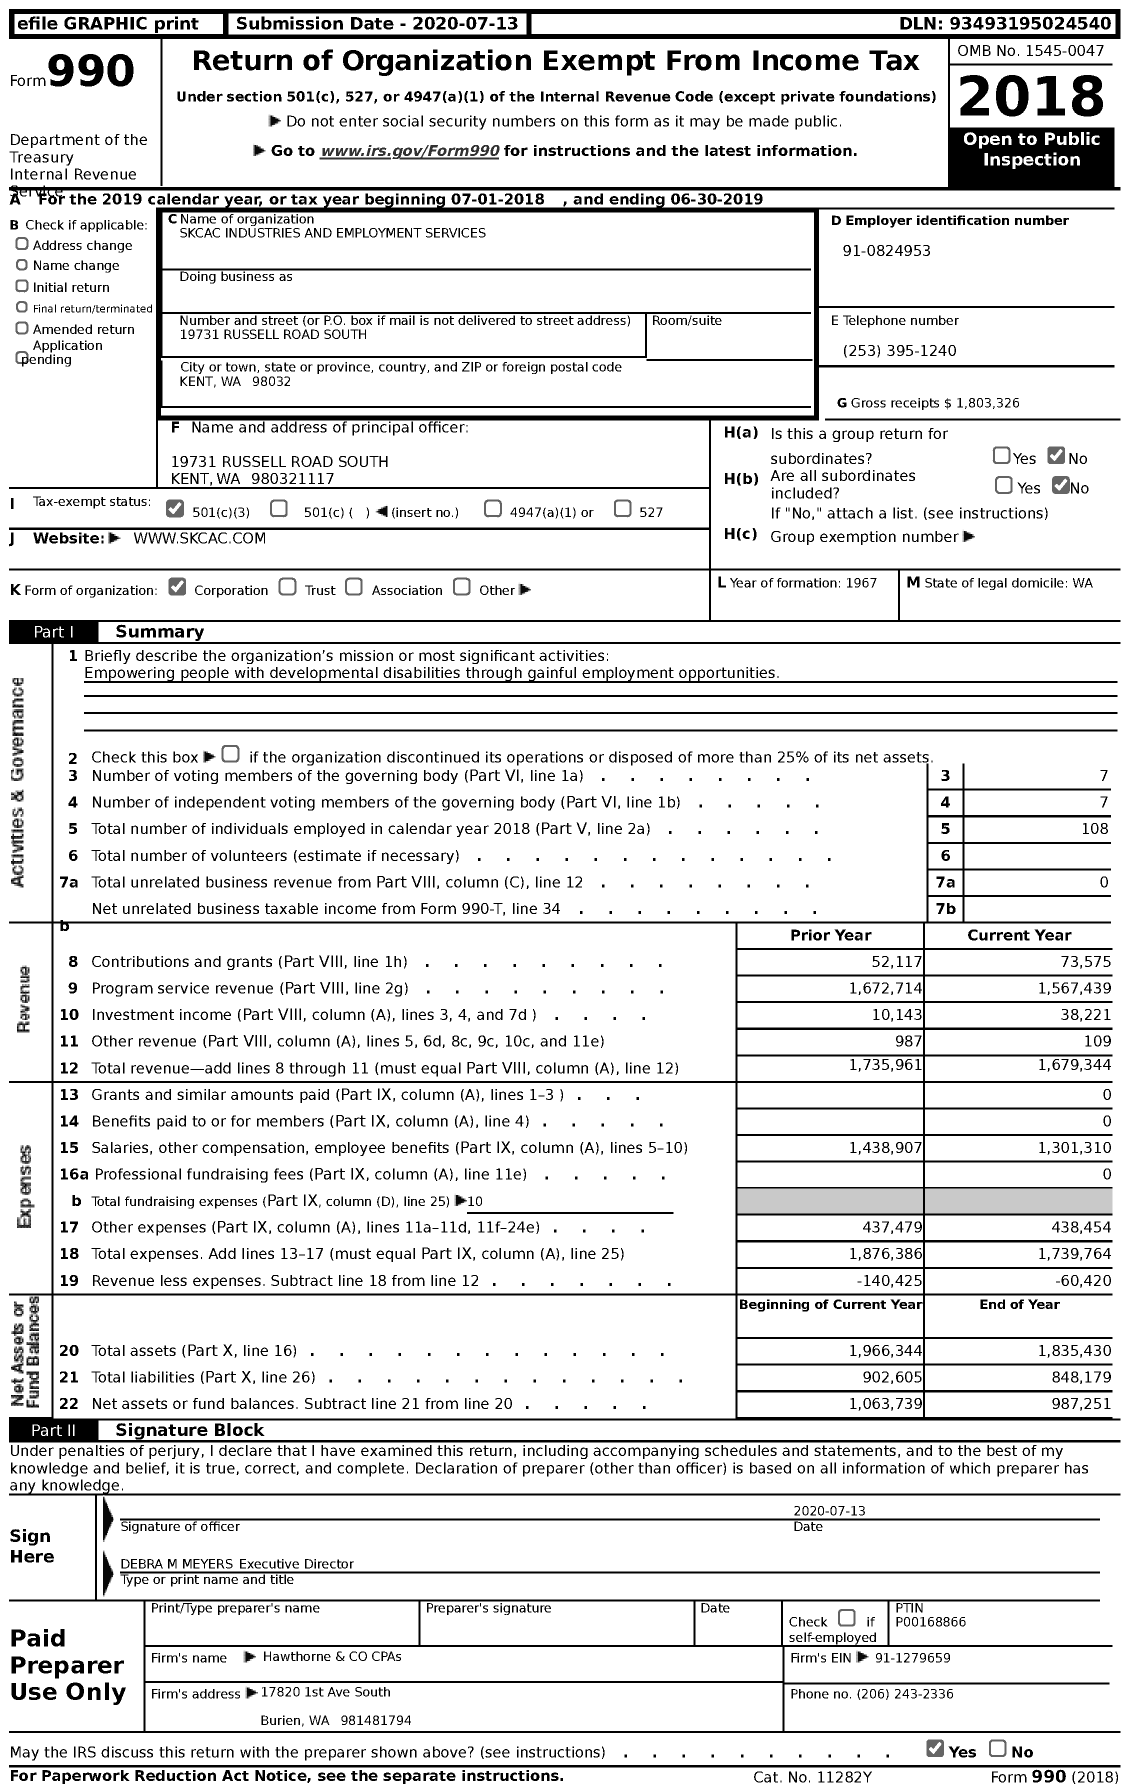 Image of first page of 2018 Form 990 for Skcac Industries and Employment Services